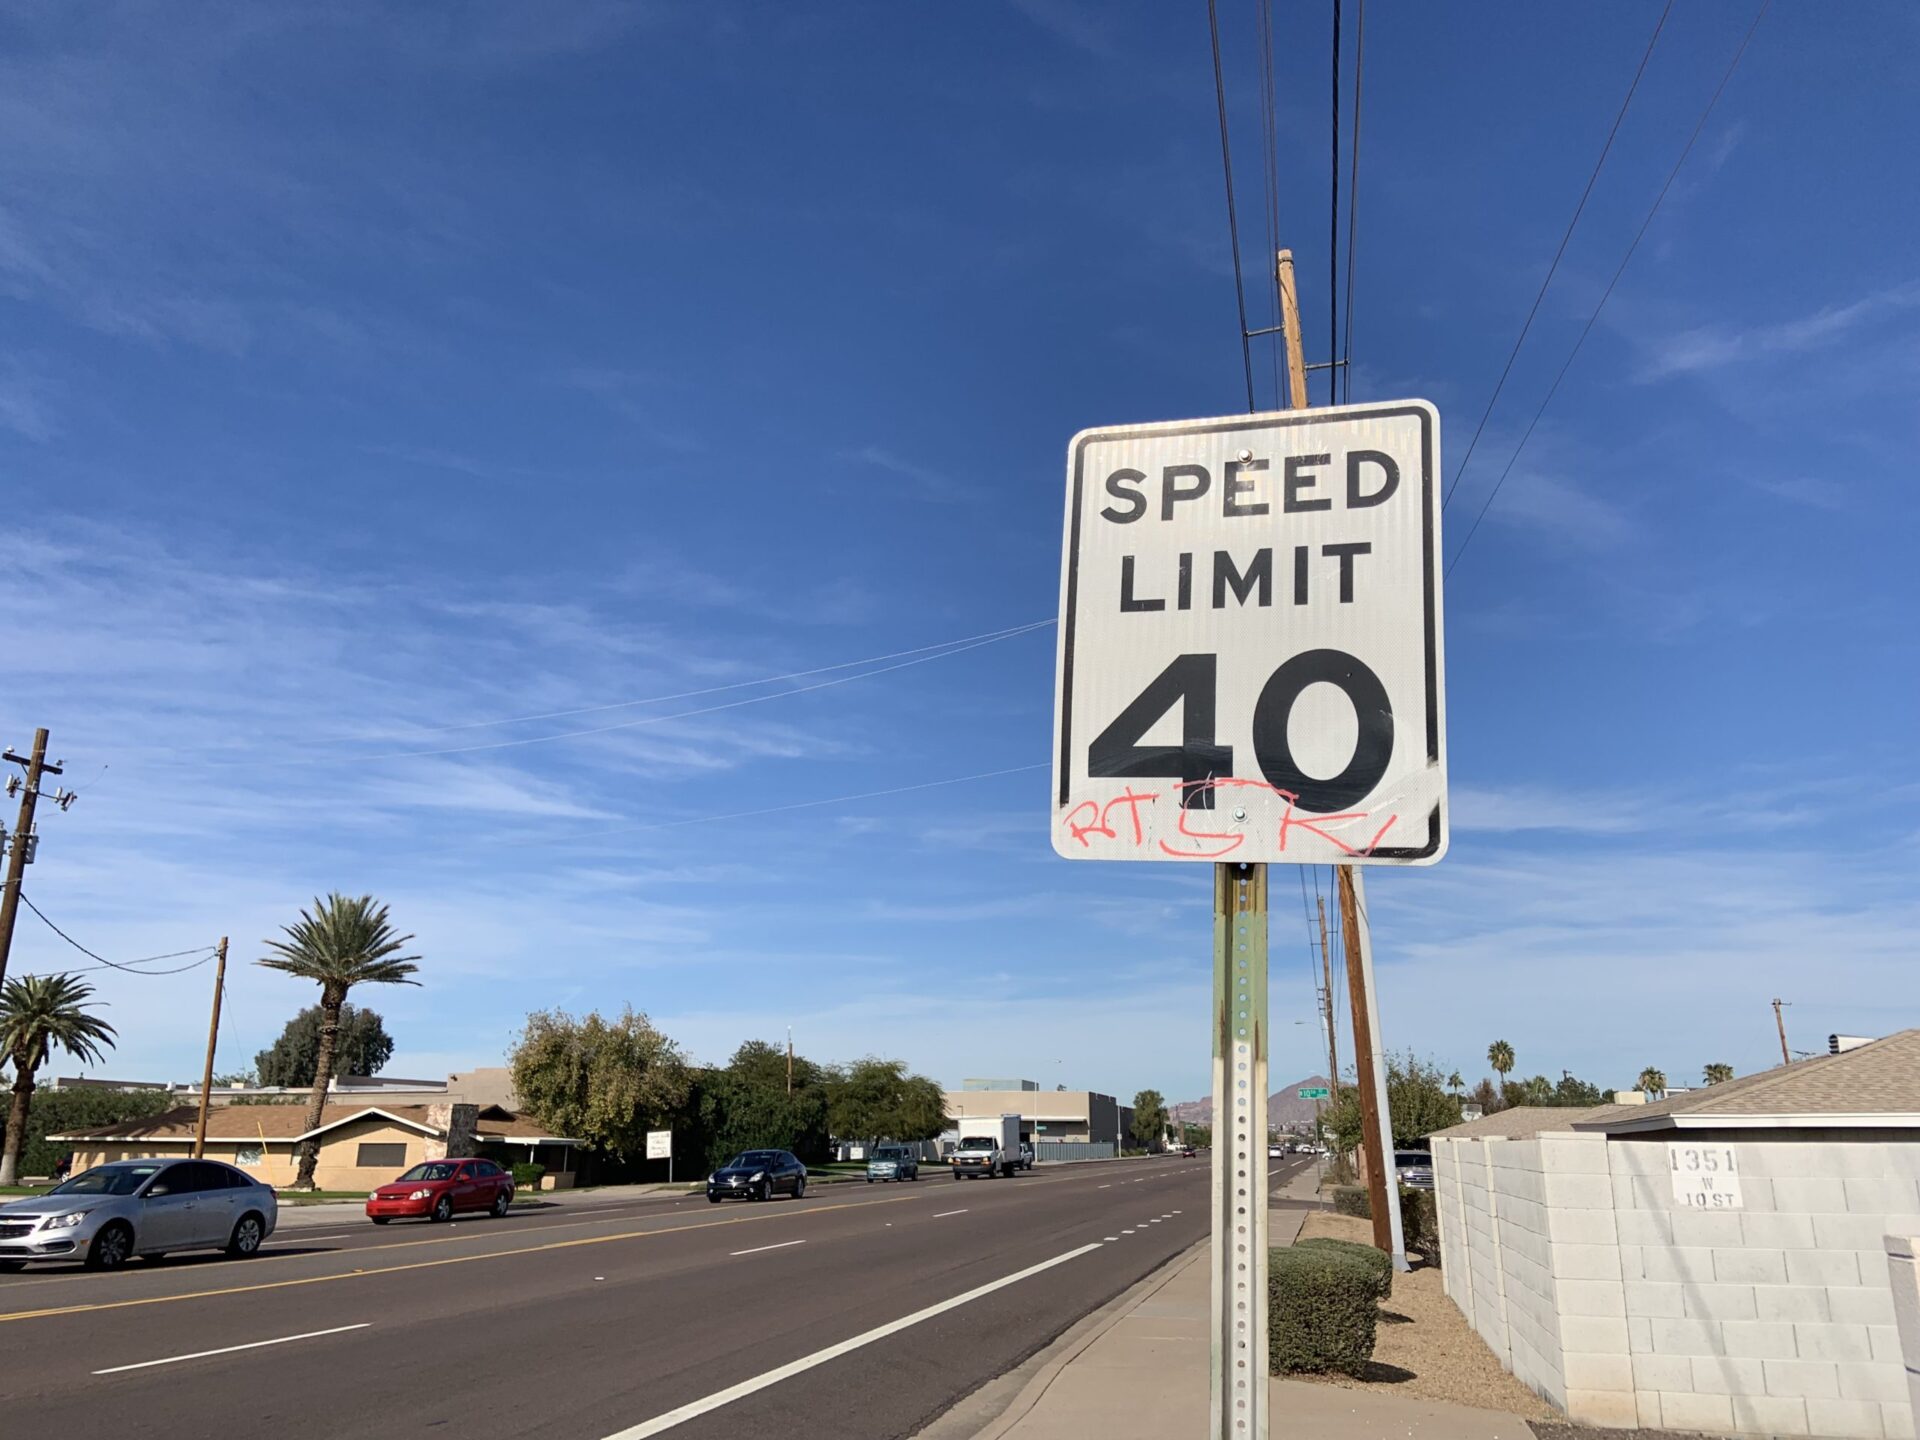 Commentary: 3 reasons why cities should lower speed limits